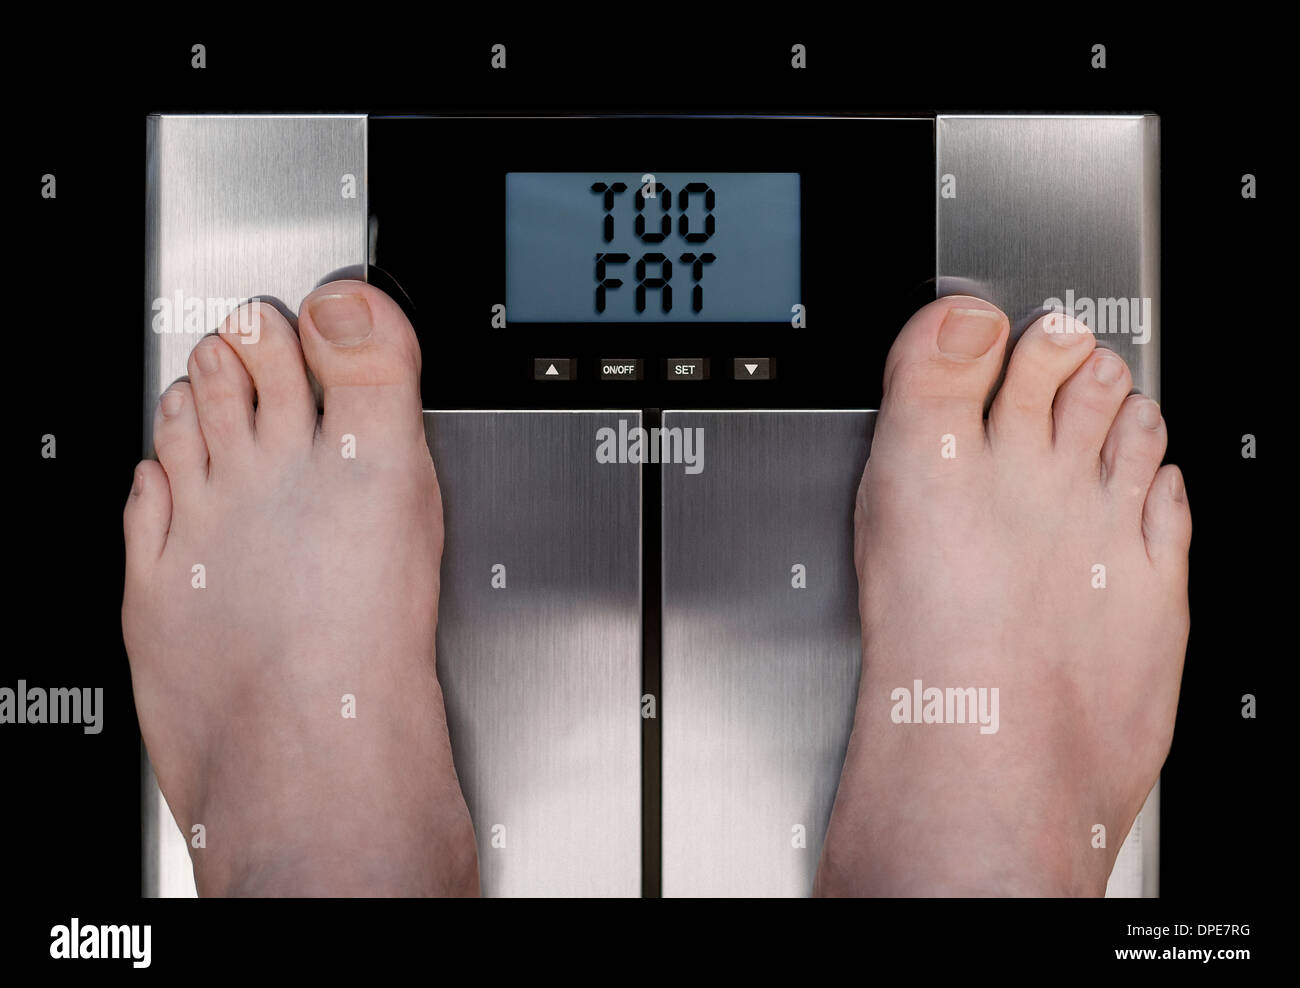 Looking Down At The Scales Far Too Overweight Stock Photo, Picture and  Royalty Free Image. Image 30209379.